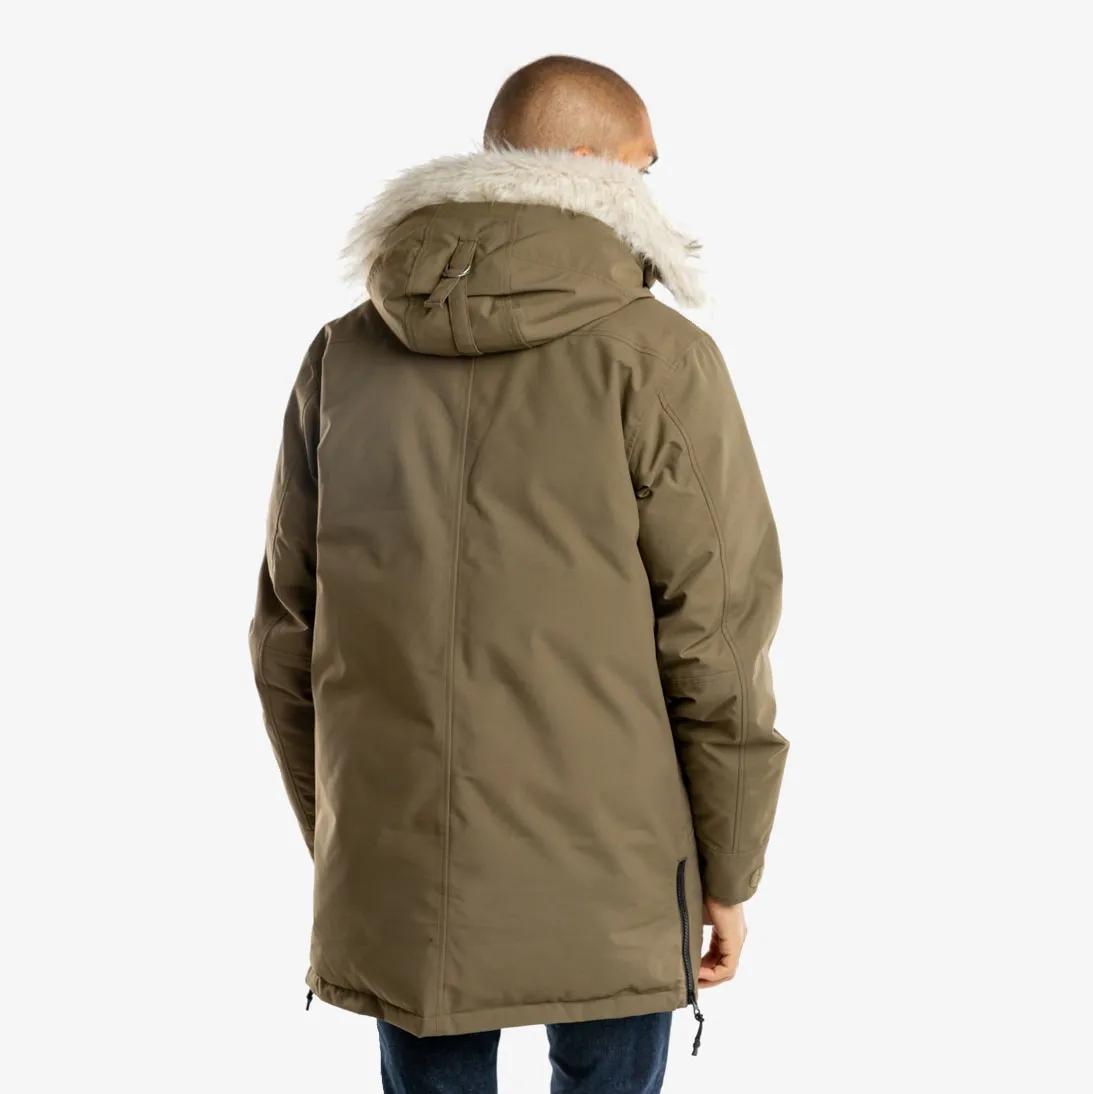 M. IMPERIAL PARKA 